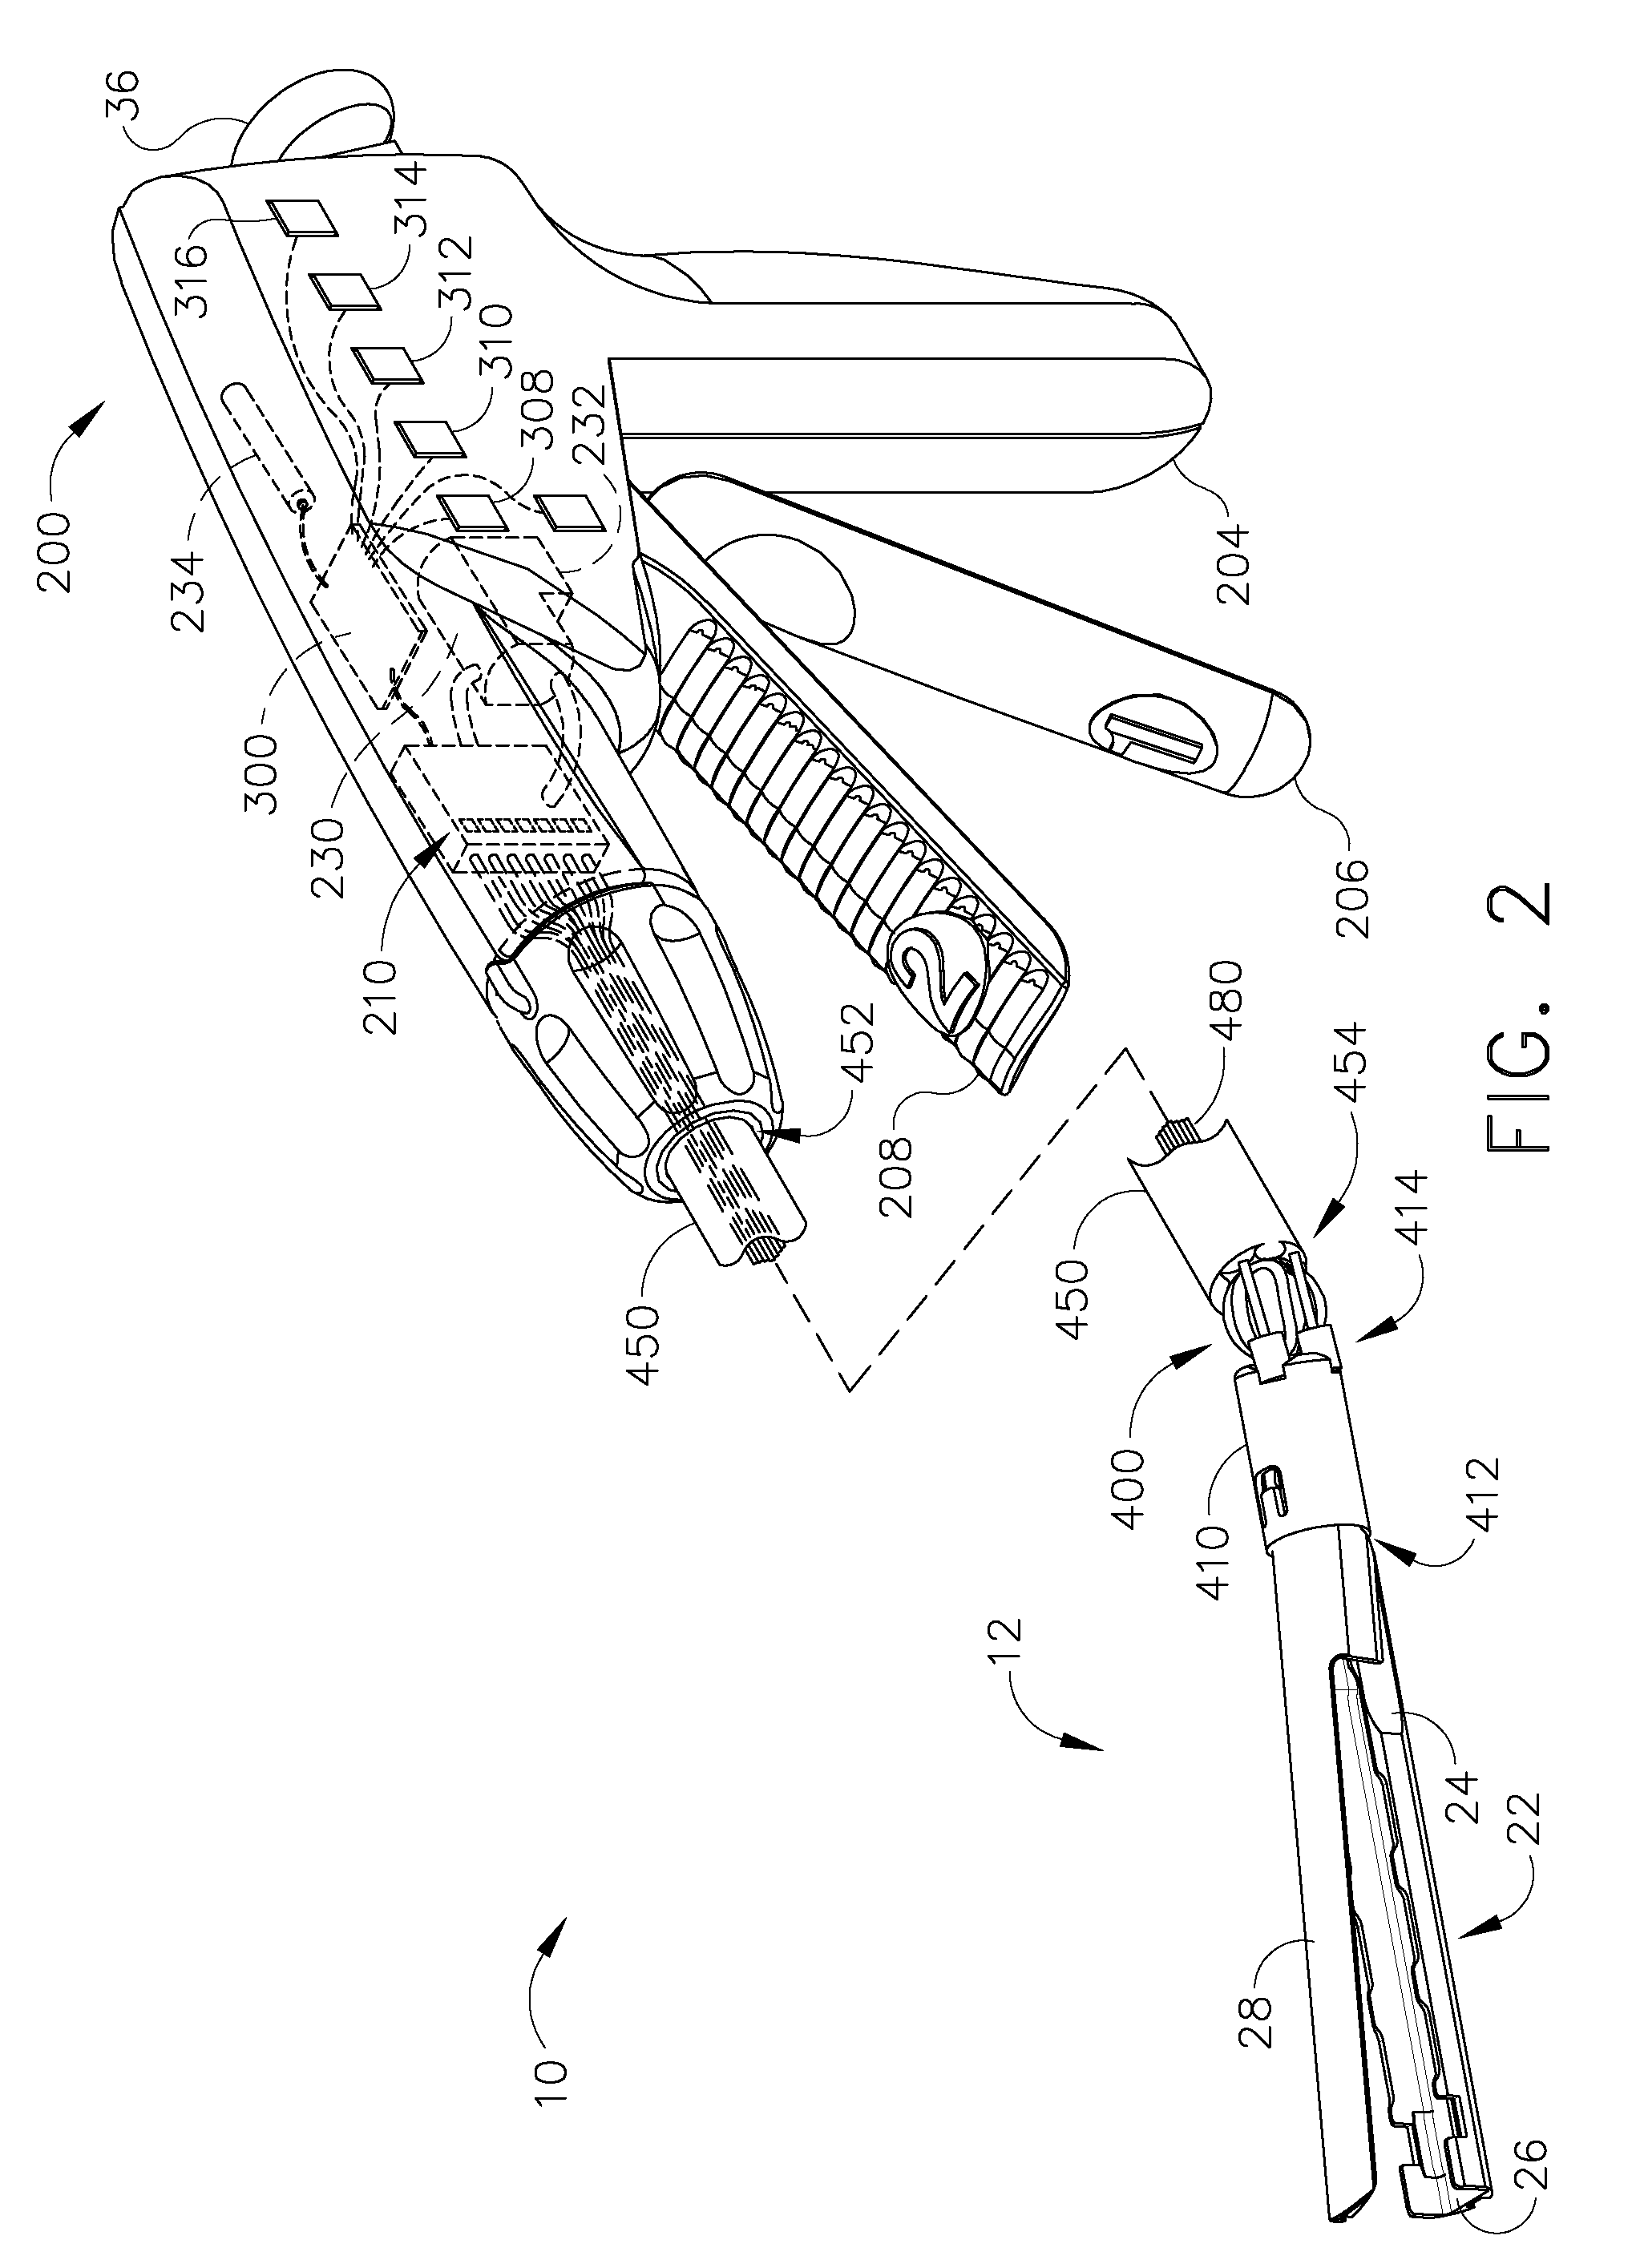 Hydraulically and electrically actuated articulation joints for surgical instruments